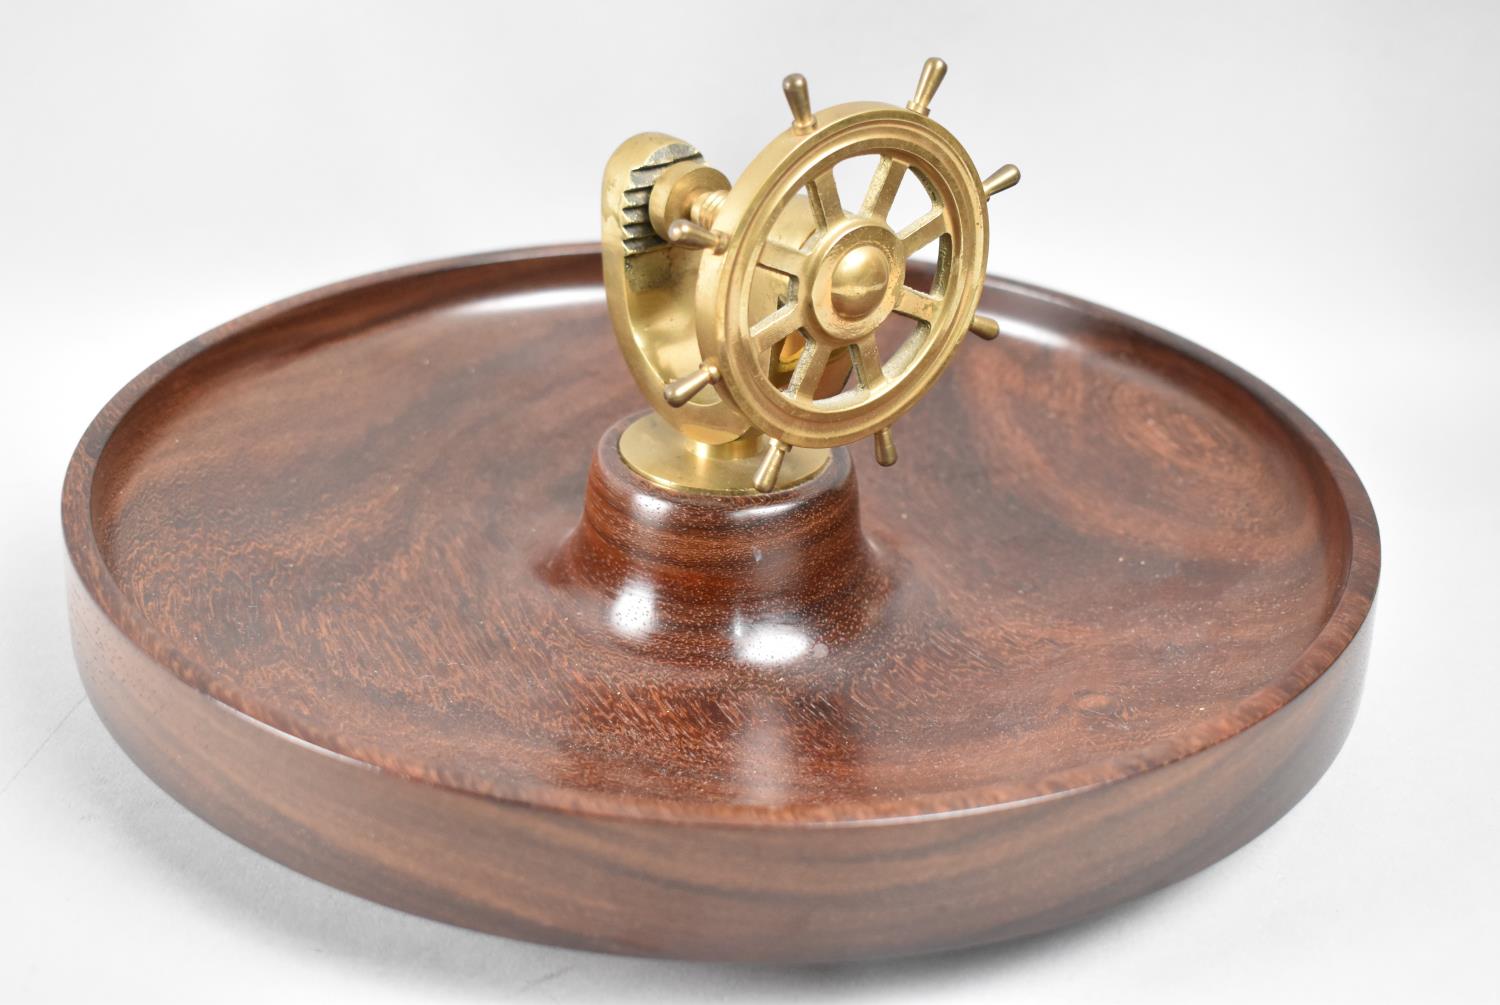 A Mid 20th Century Wooden Nut Bowl with Centre Raised Novelty Nut Cracker in the Form of a Ships